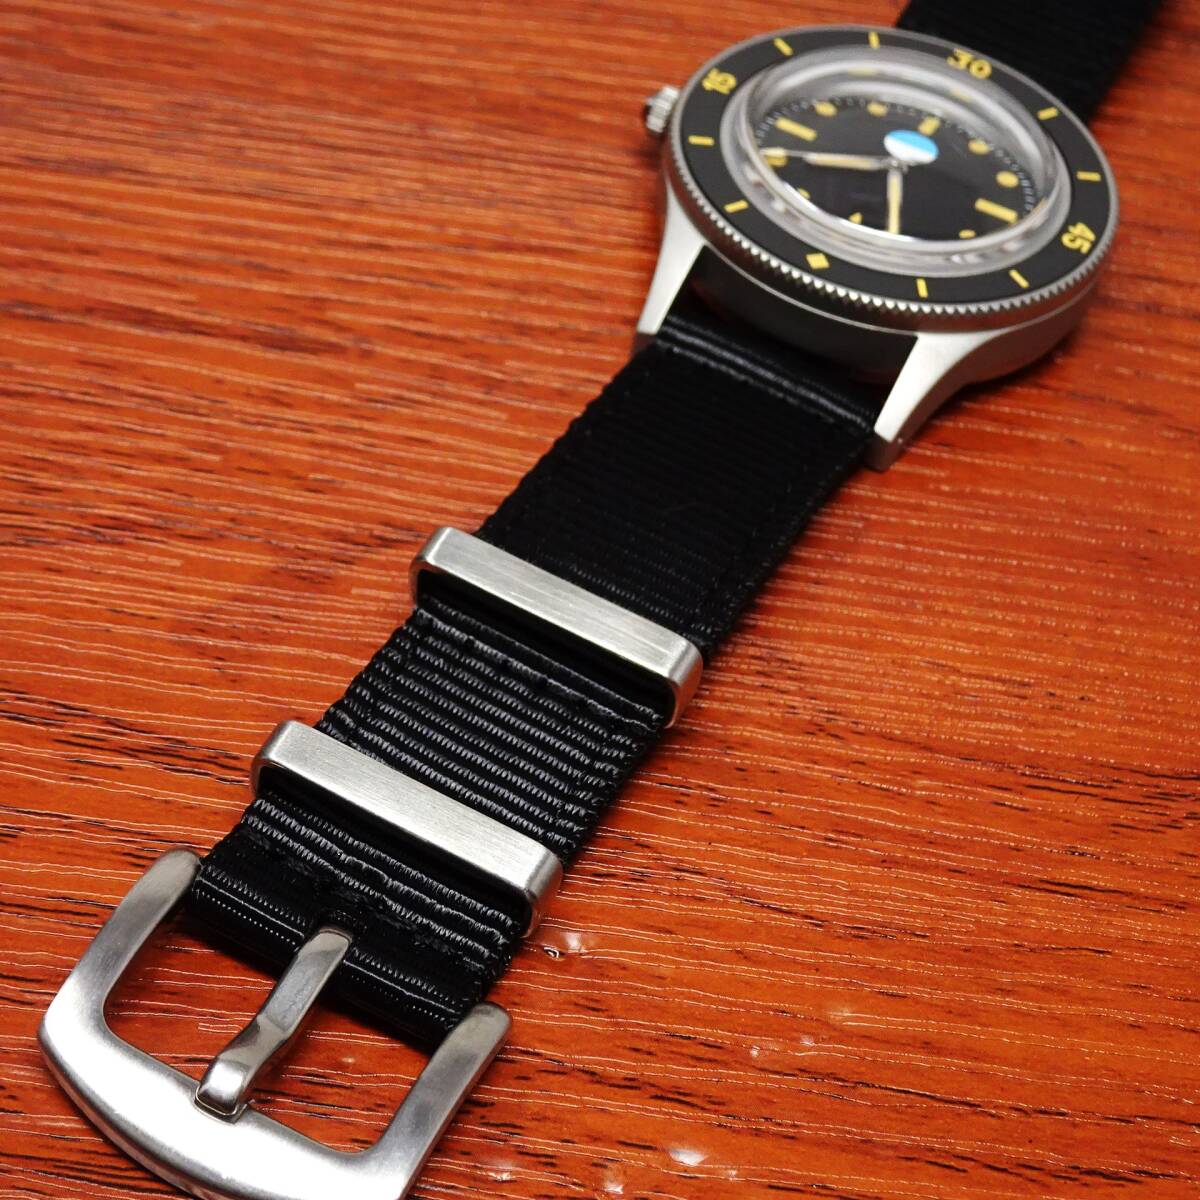  free shipping * new goods = OEM made no-ro gomodel * Vintage oma-ju watch * machine NH35A wristwatch *316L made of stainless steel case * ceramic bezel 